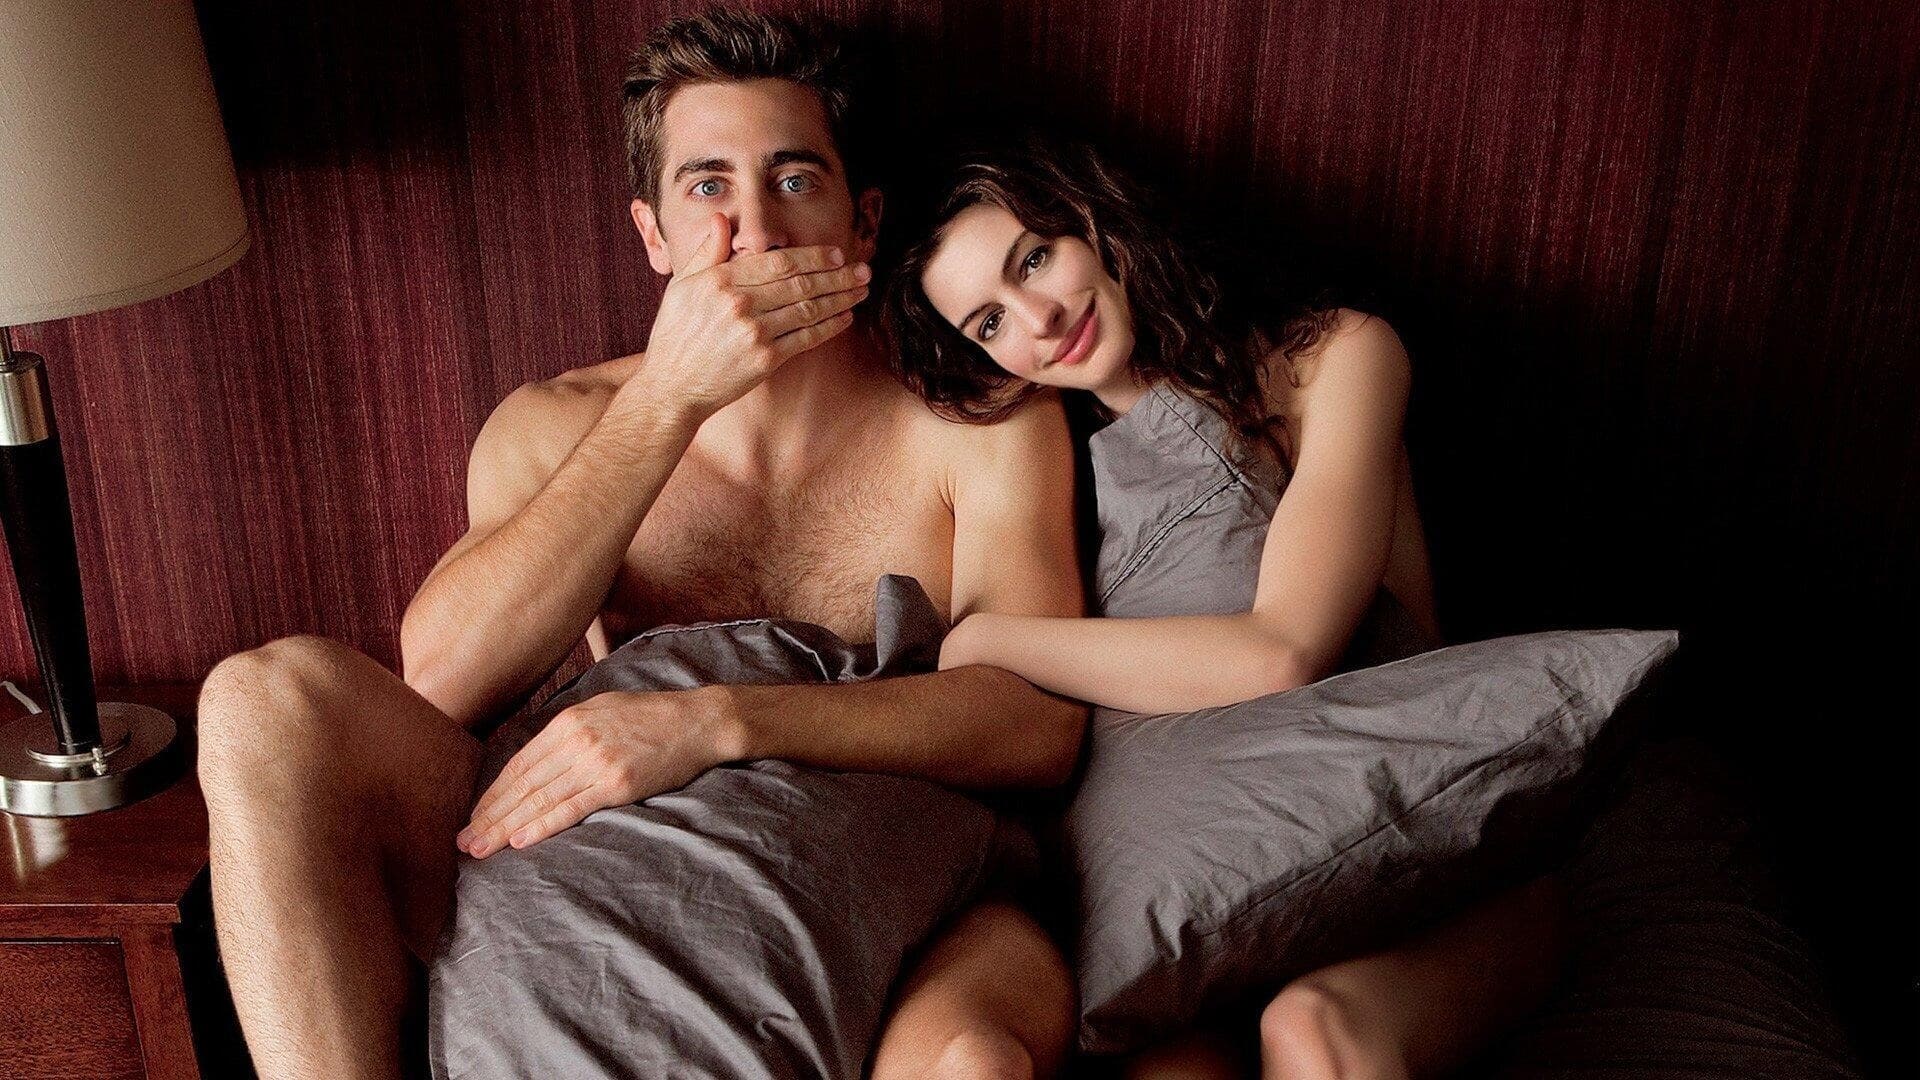 Love & Other Drugs (2010)